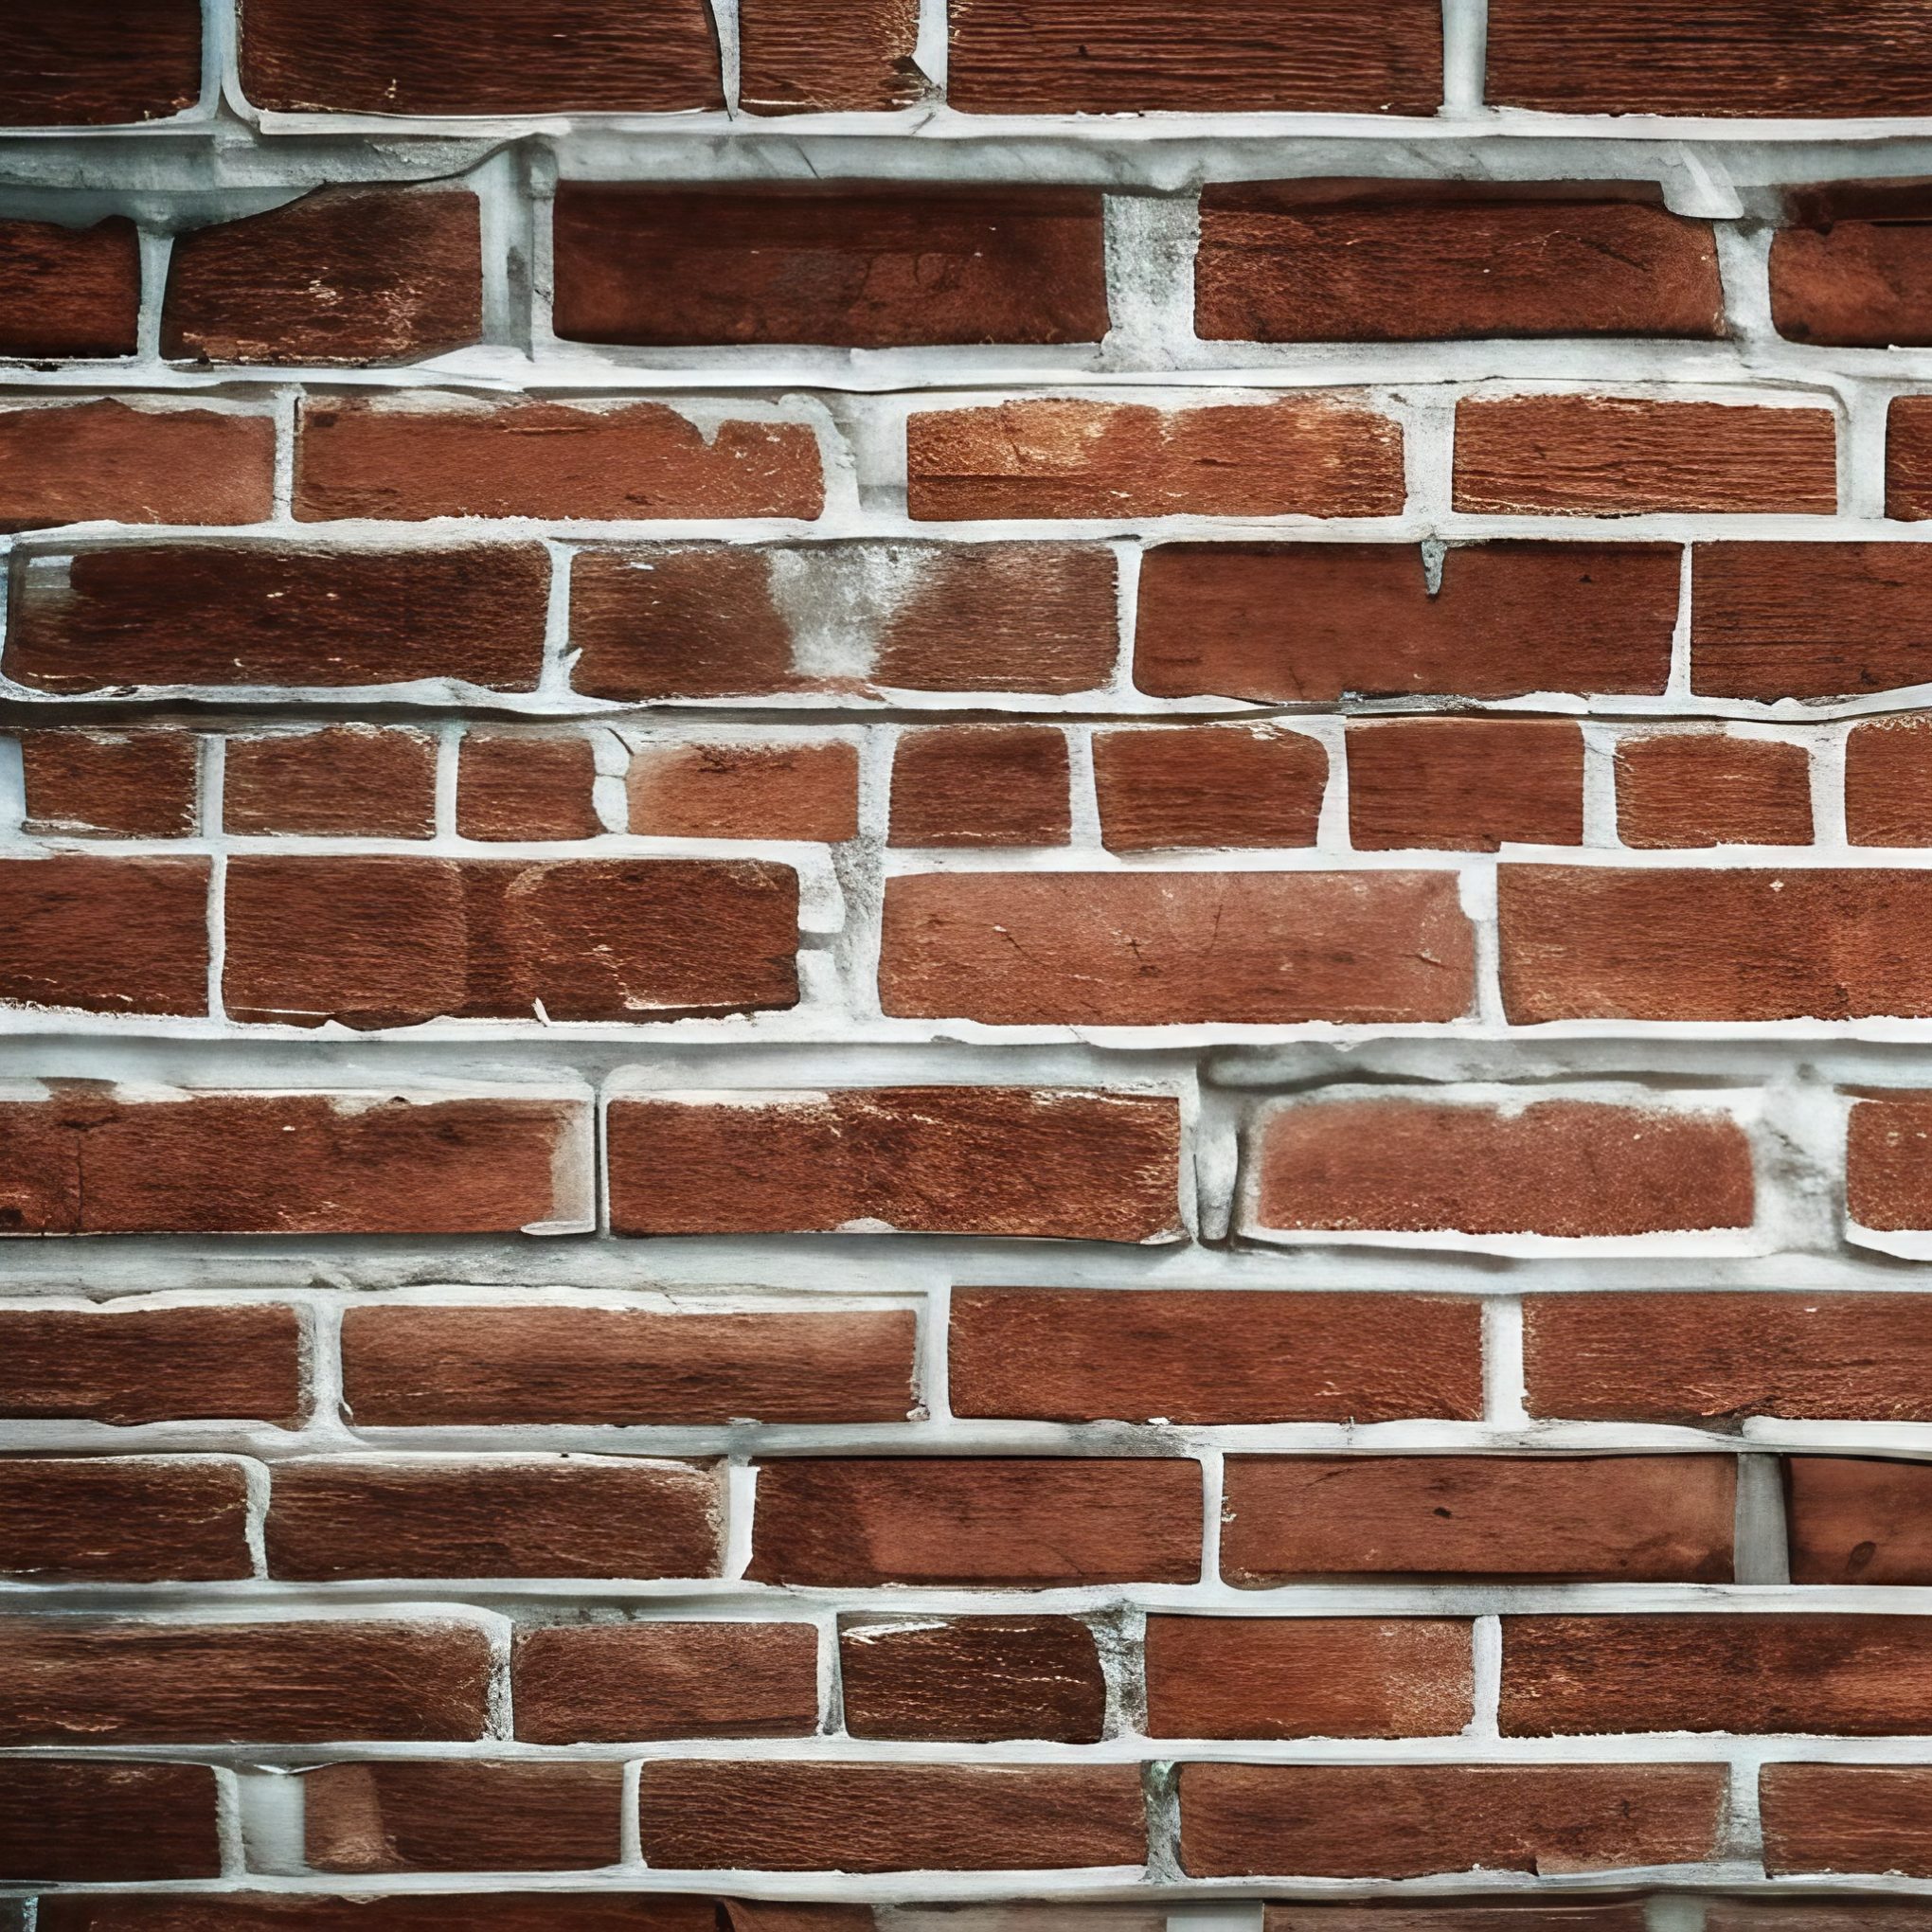 Red Brick Wall Background Free Stock Image